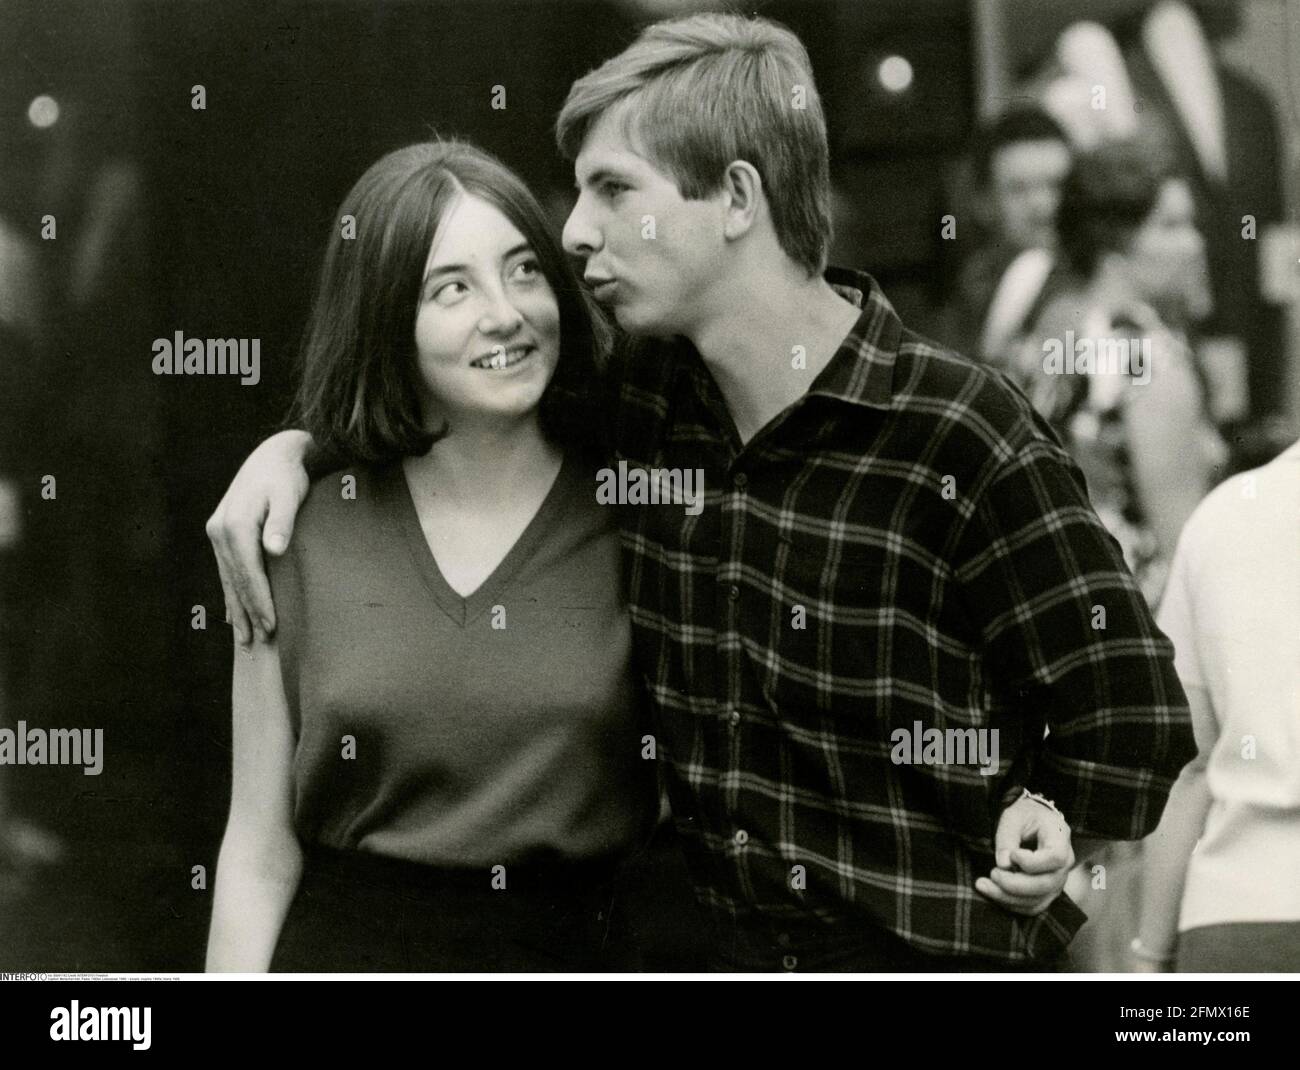 Menschen, Paare, 60er Jahre, Liebhaber, 1968, ADDITIONAL-RIGHTS-CLEARANCE-INFO-NOT-AVAILABLE Stockfoto